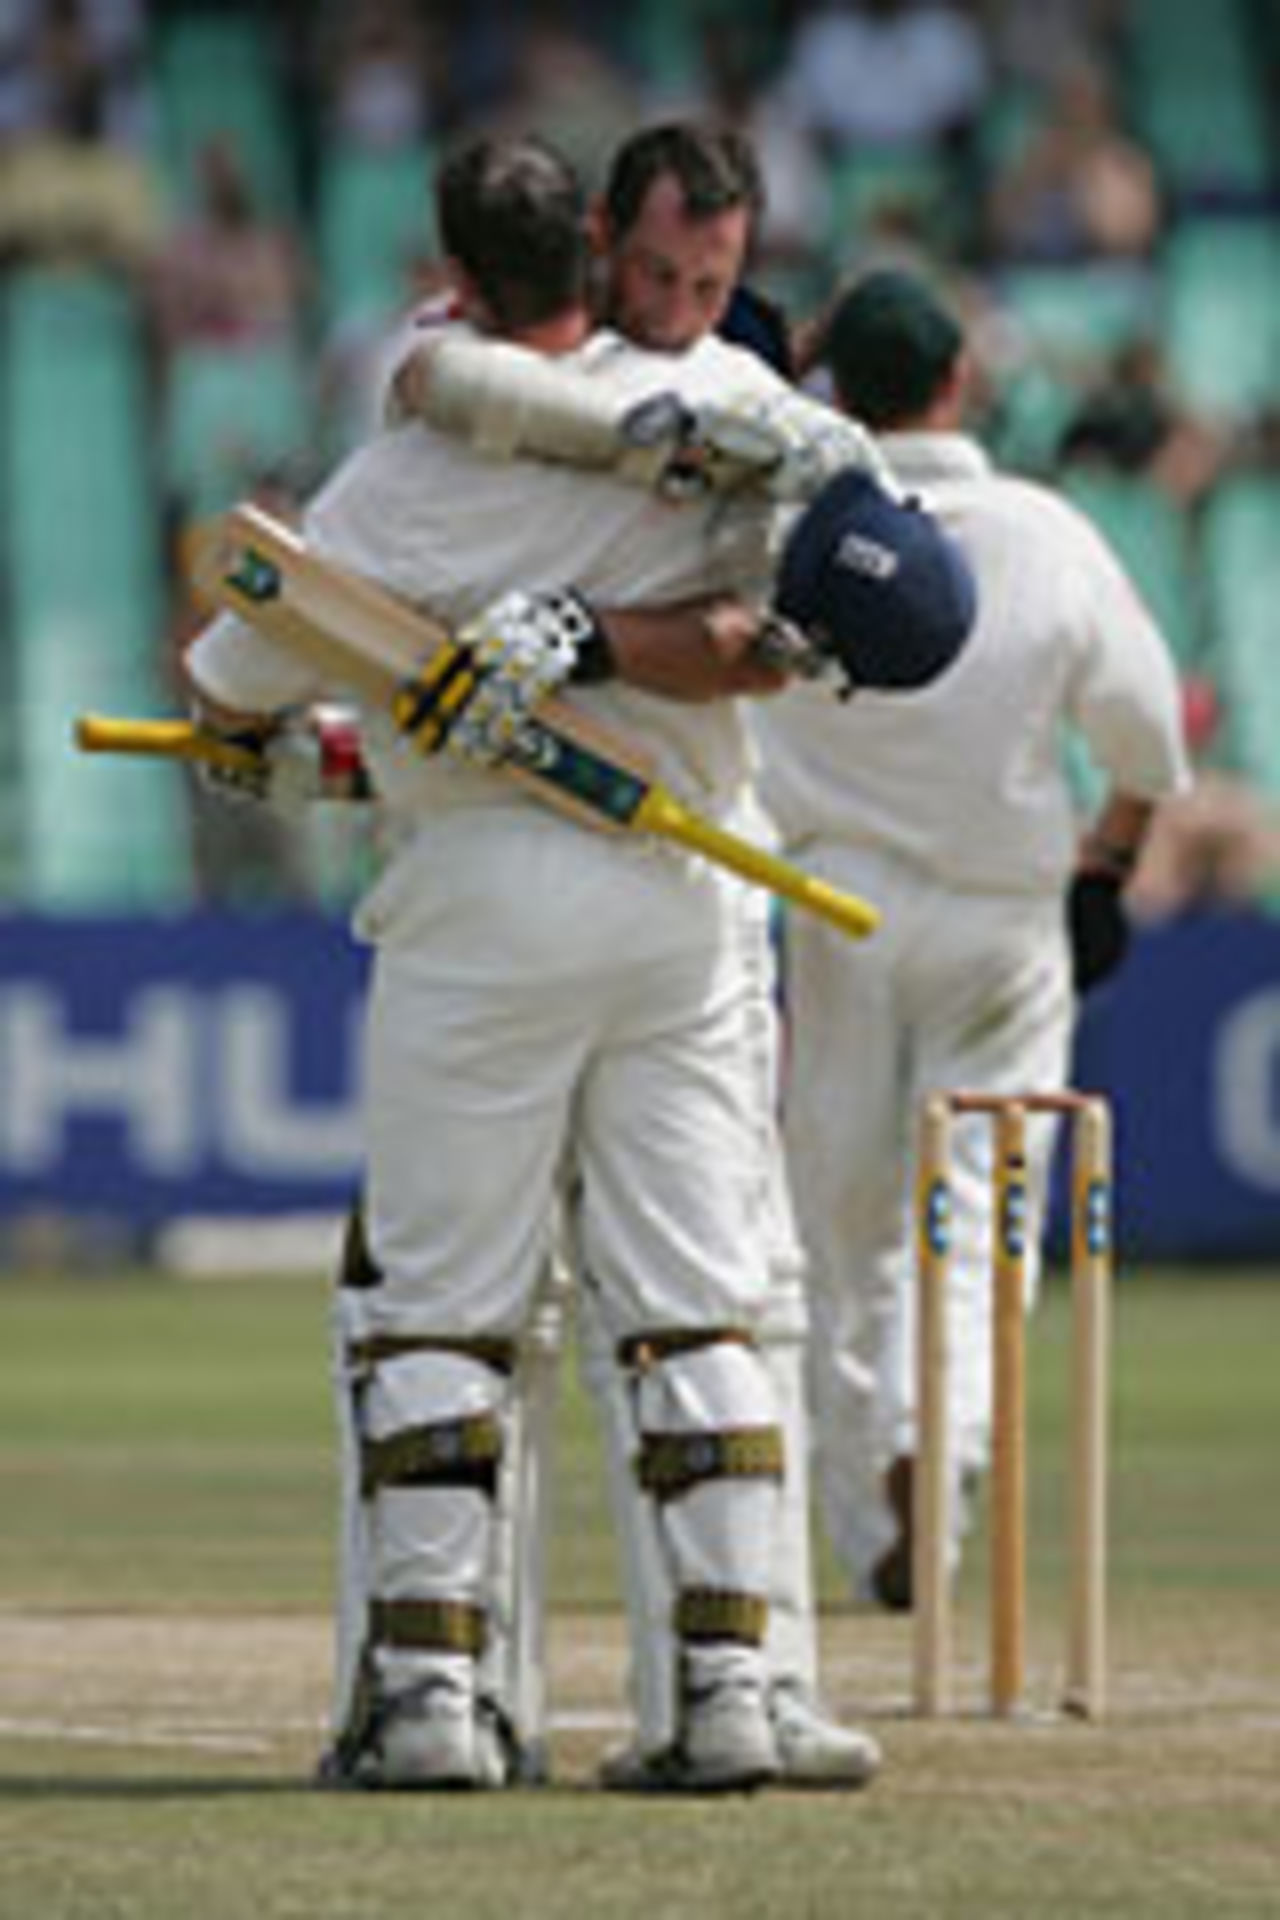 Marcus Trescothick and Andrew Strauss hug, South Africa v England, 2nd Test, Durban, 3rd day, December 29 2004